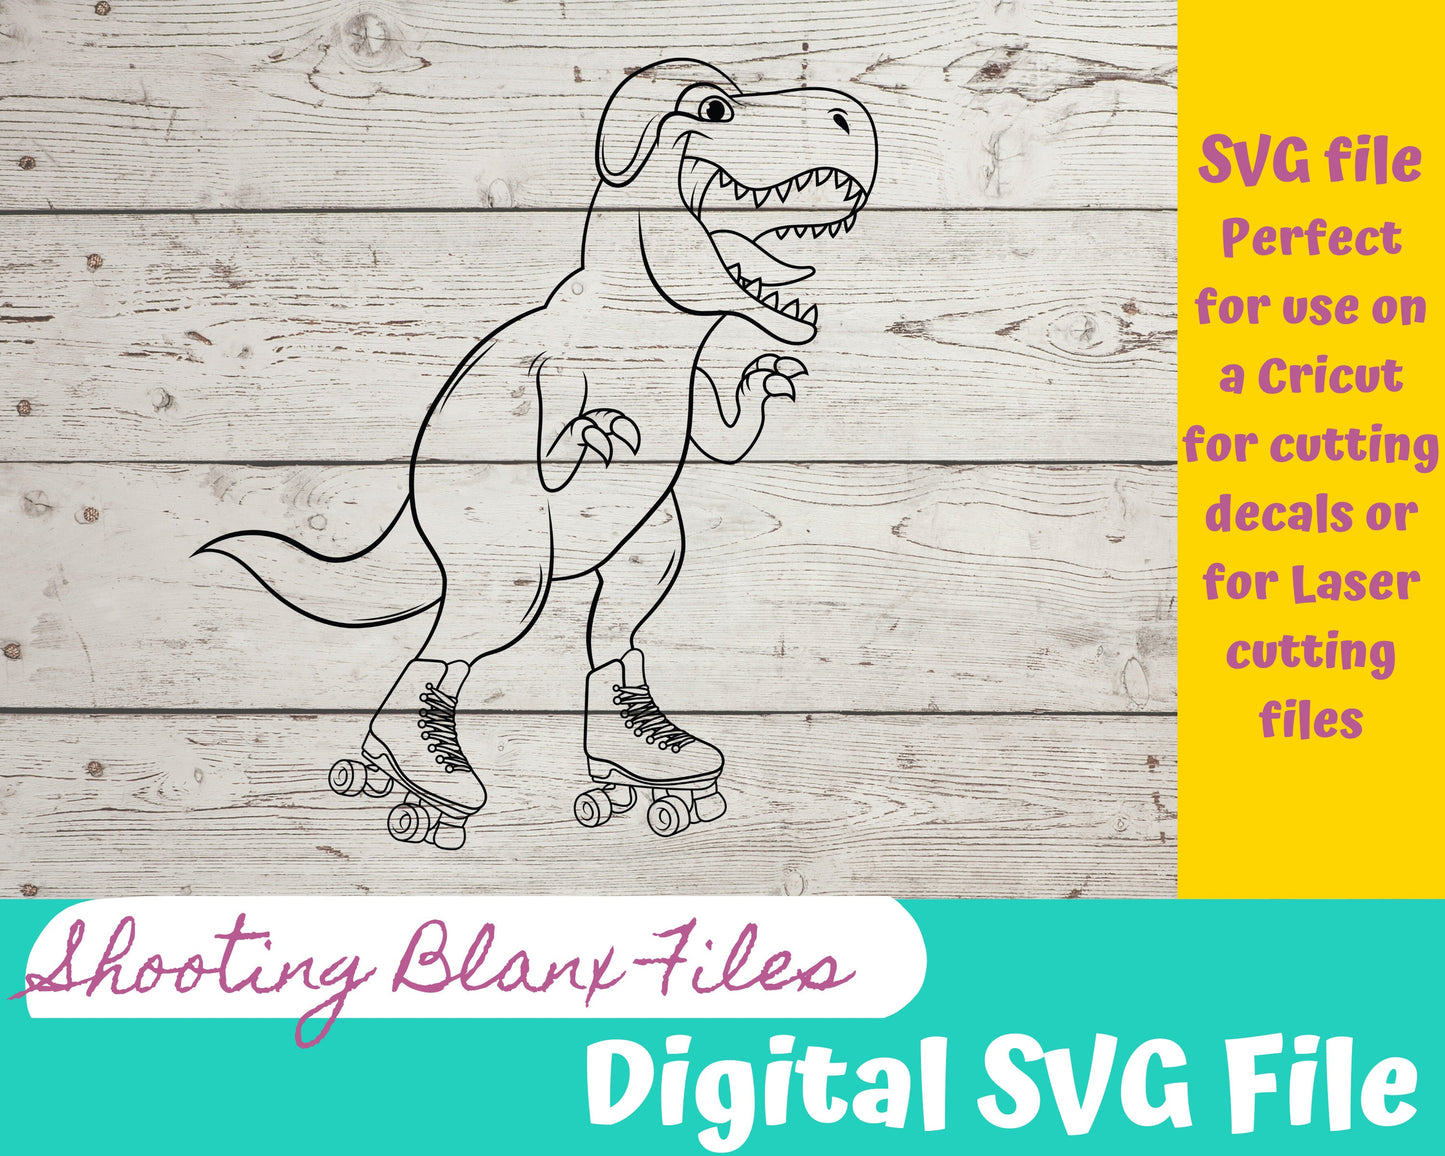 T-rex Dino bundle SVG files perfect for Cricut, Cameo, or Silhouette also for laser engraving Glowforge, Jurassic, Ice Age